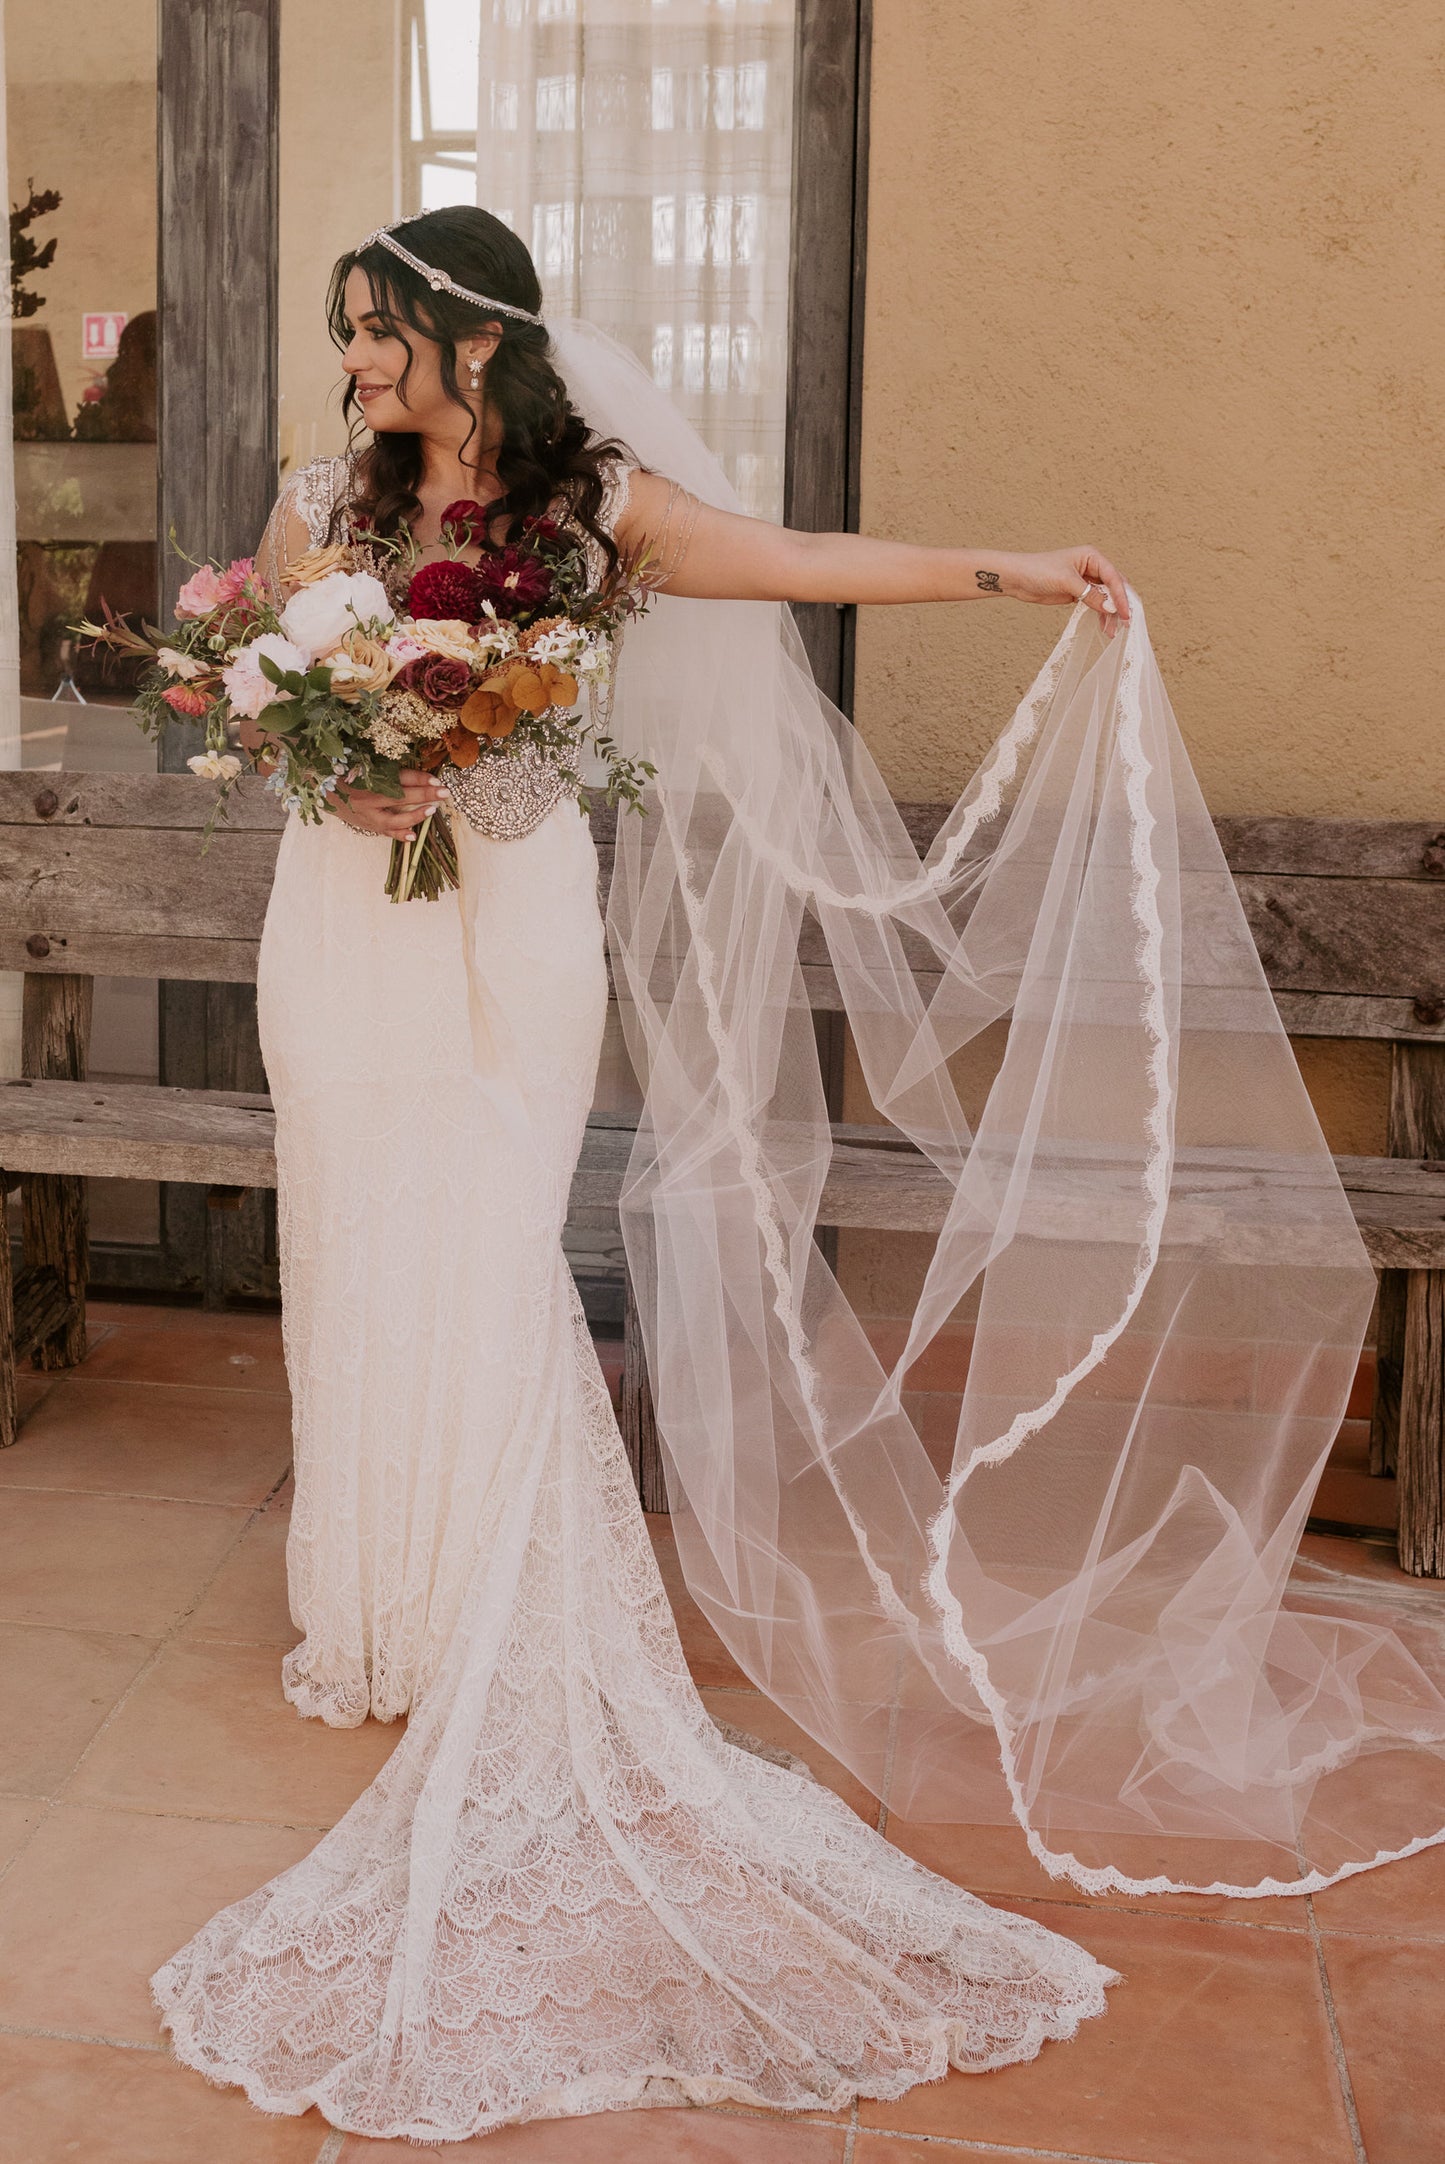 thin scallop wedding veil with eyelash edge starting at waist on bohemian Mexican bride holding burgundy and rust bouquet